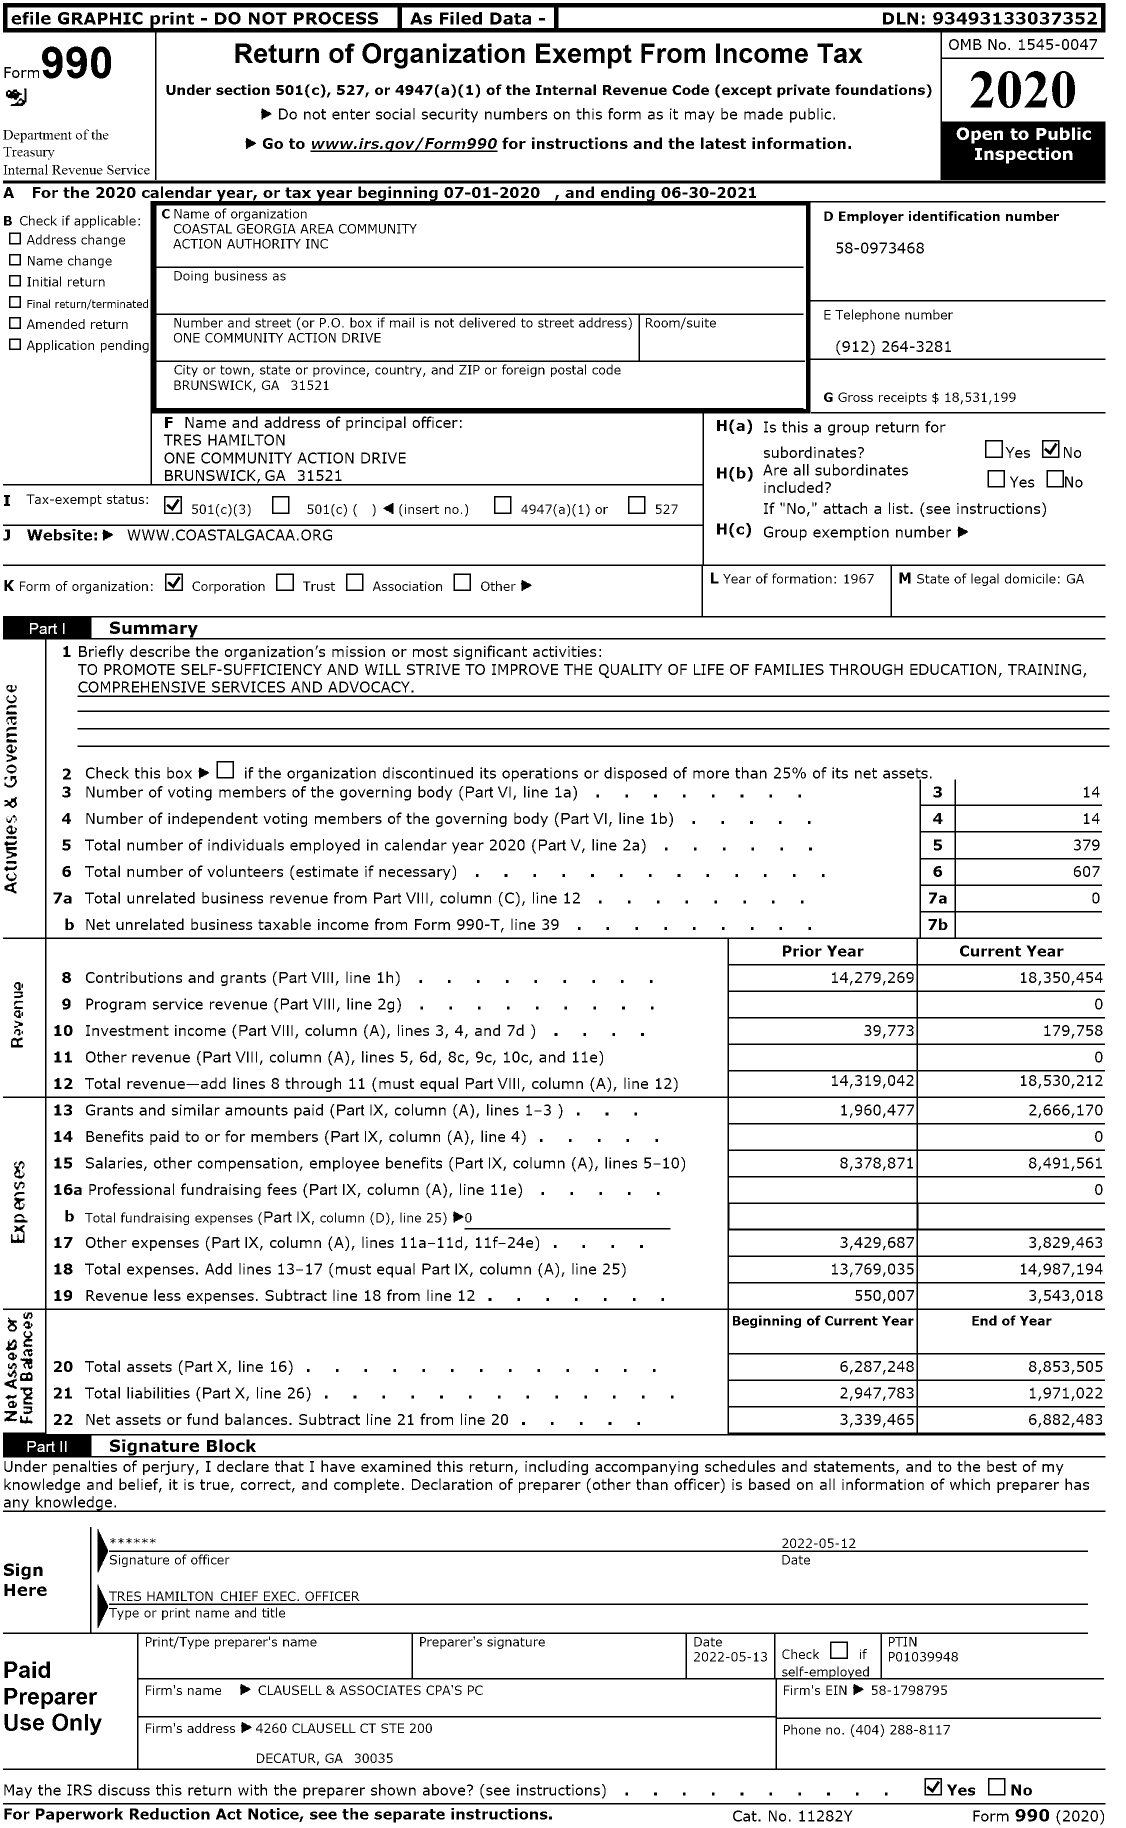 Image of first page of 2020 Form 990 for Coastal Georgia Area Community Action Authority